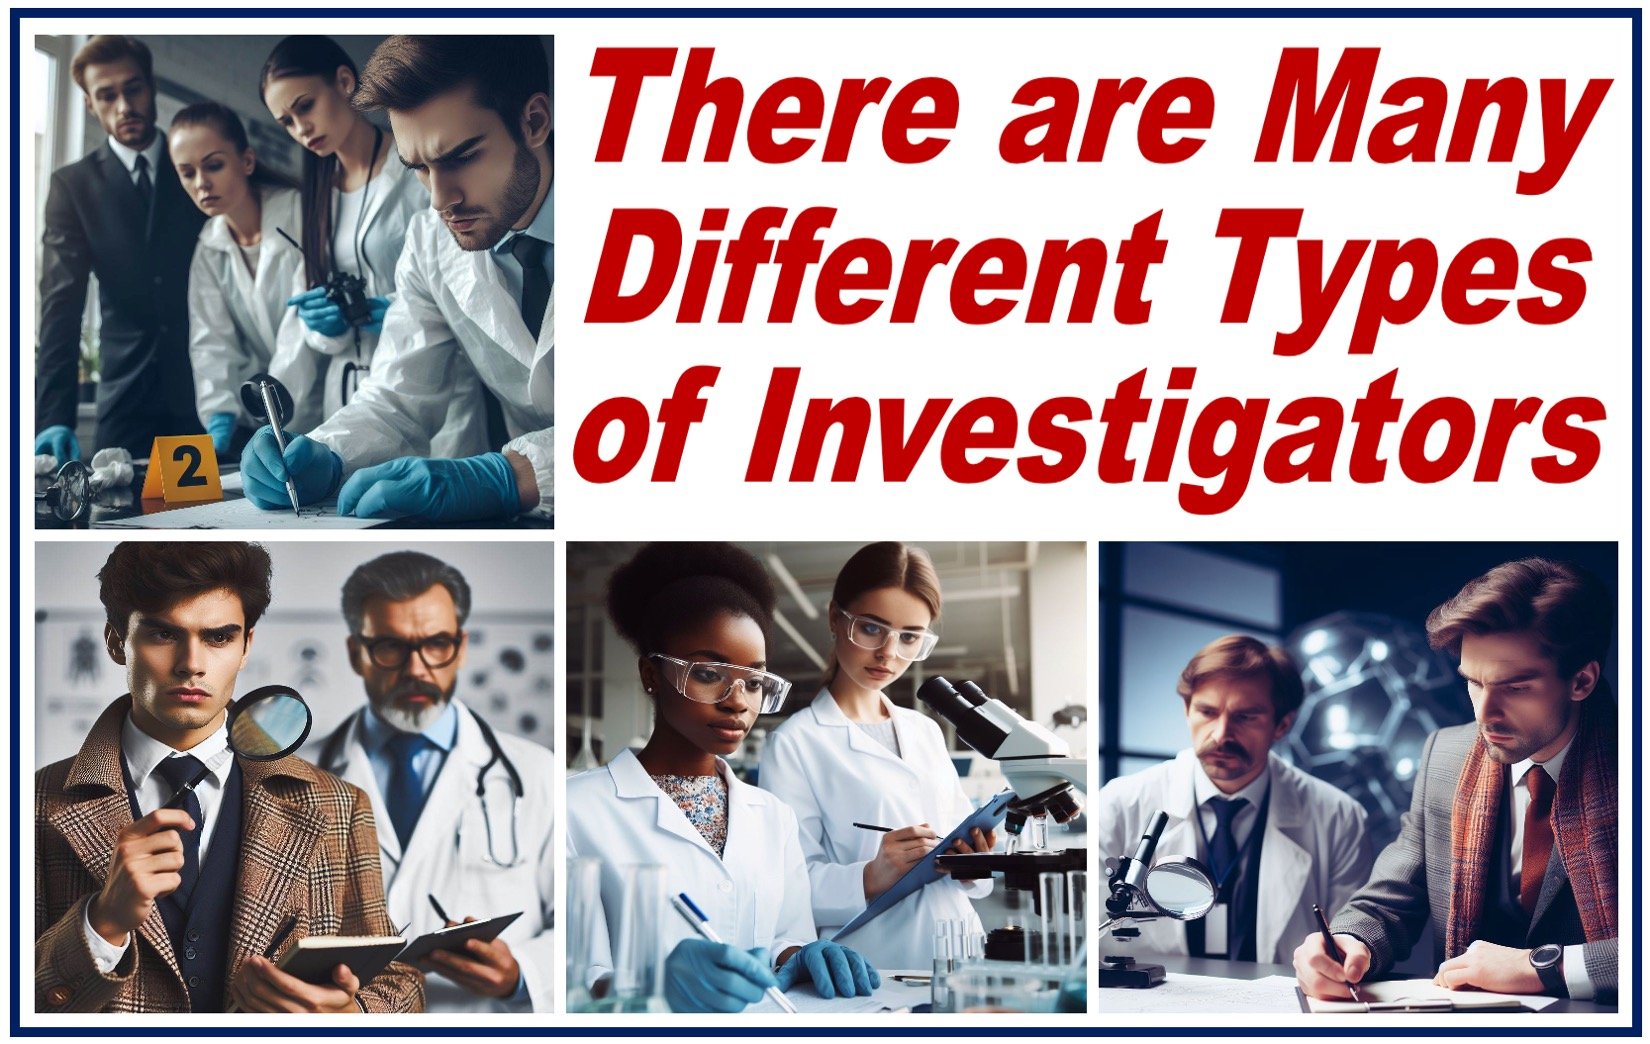 Four images showing different types of investigators